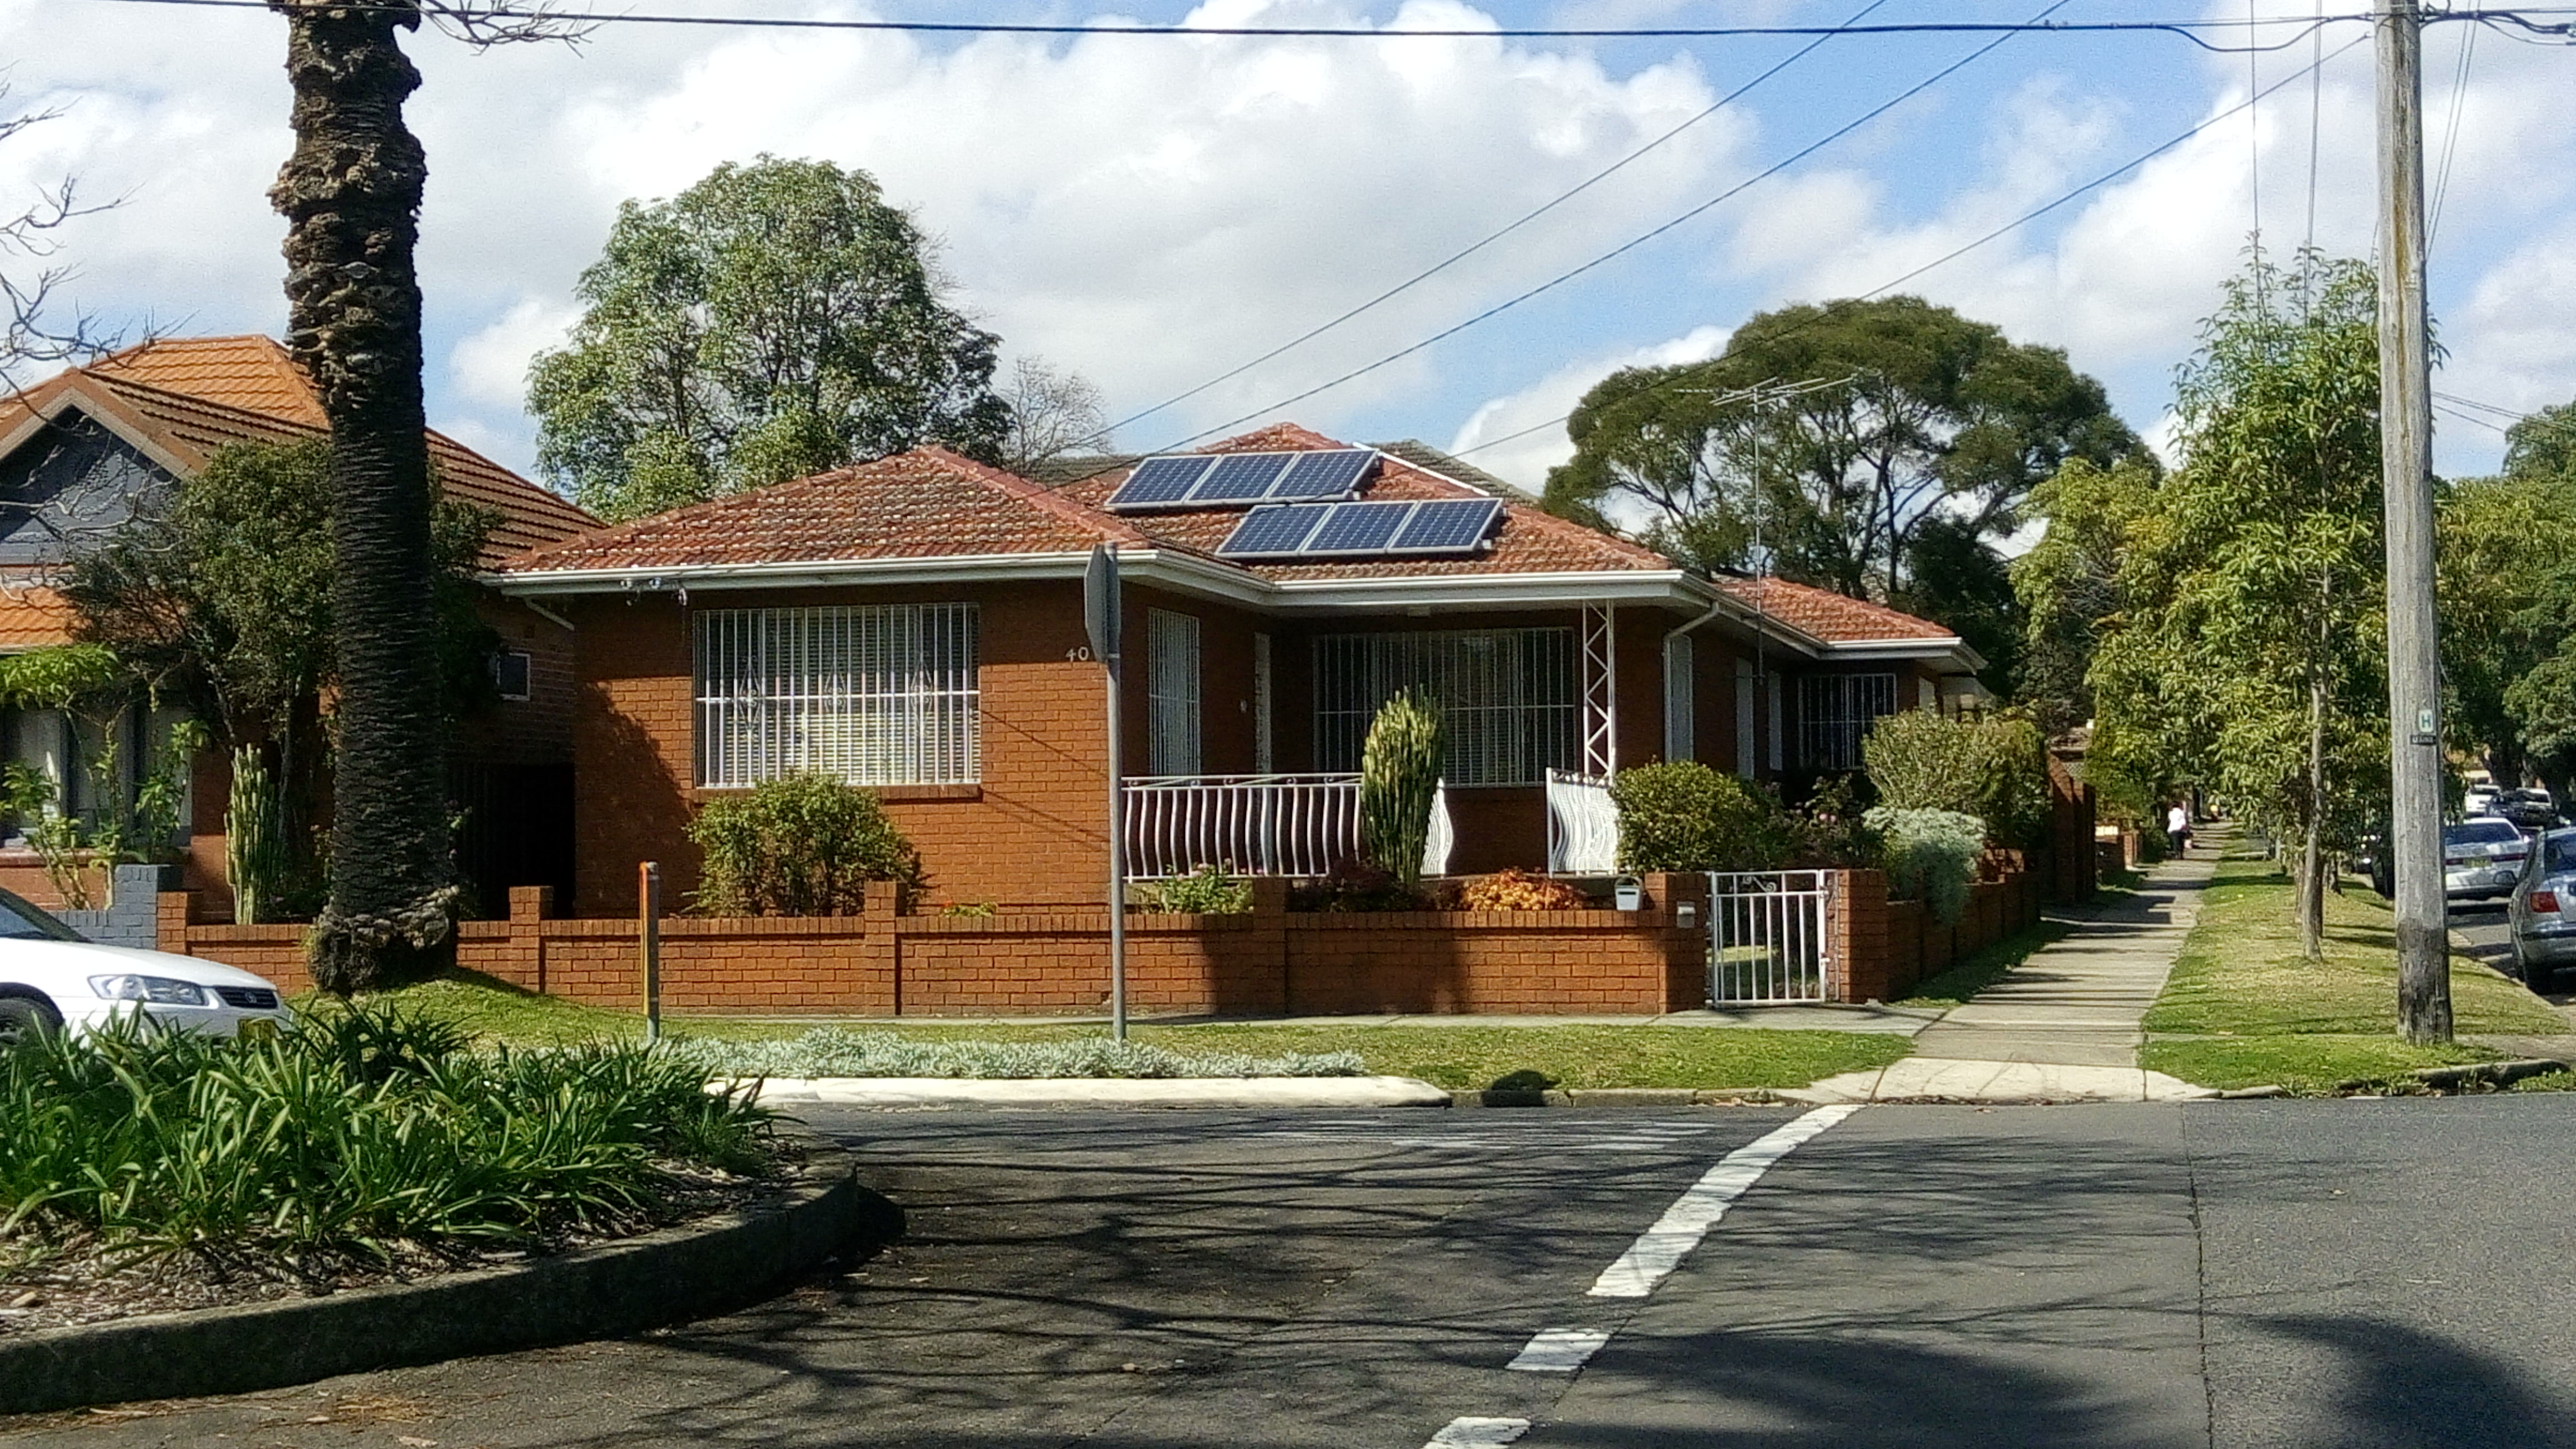 The Difference Between On-grid And Off-grid Solar PV Power System